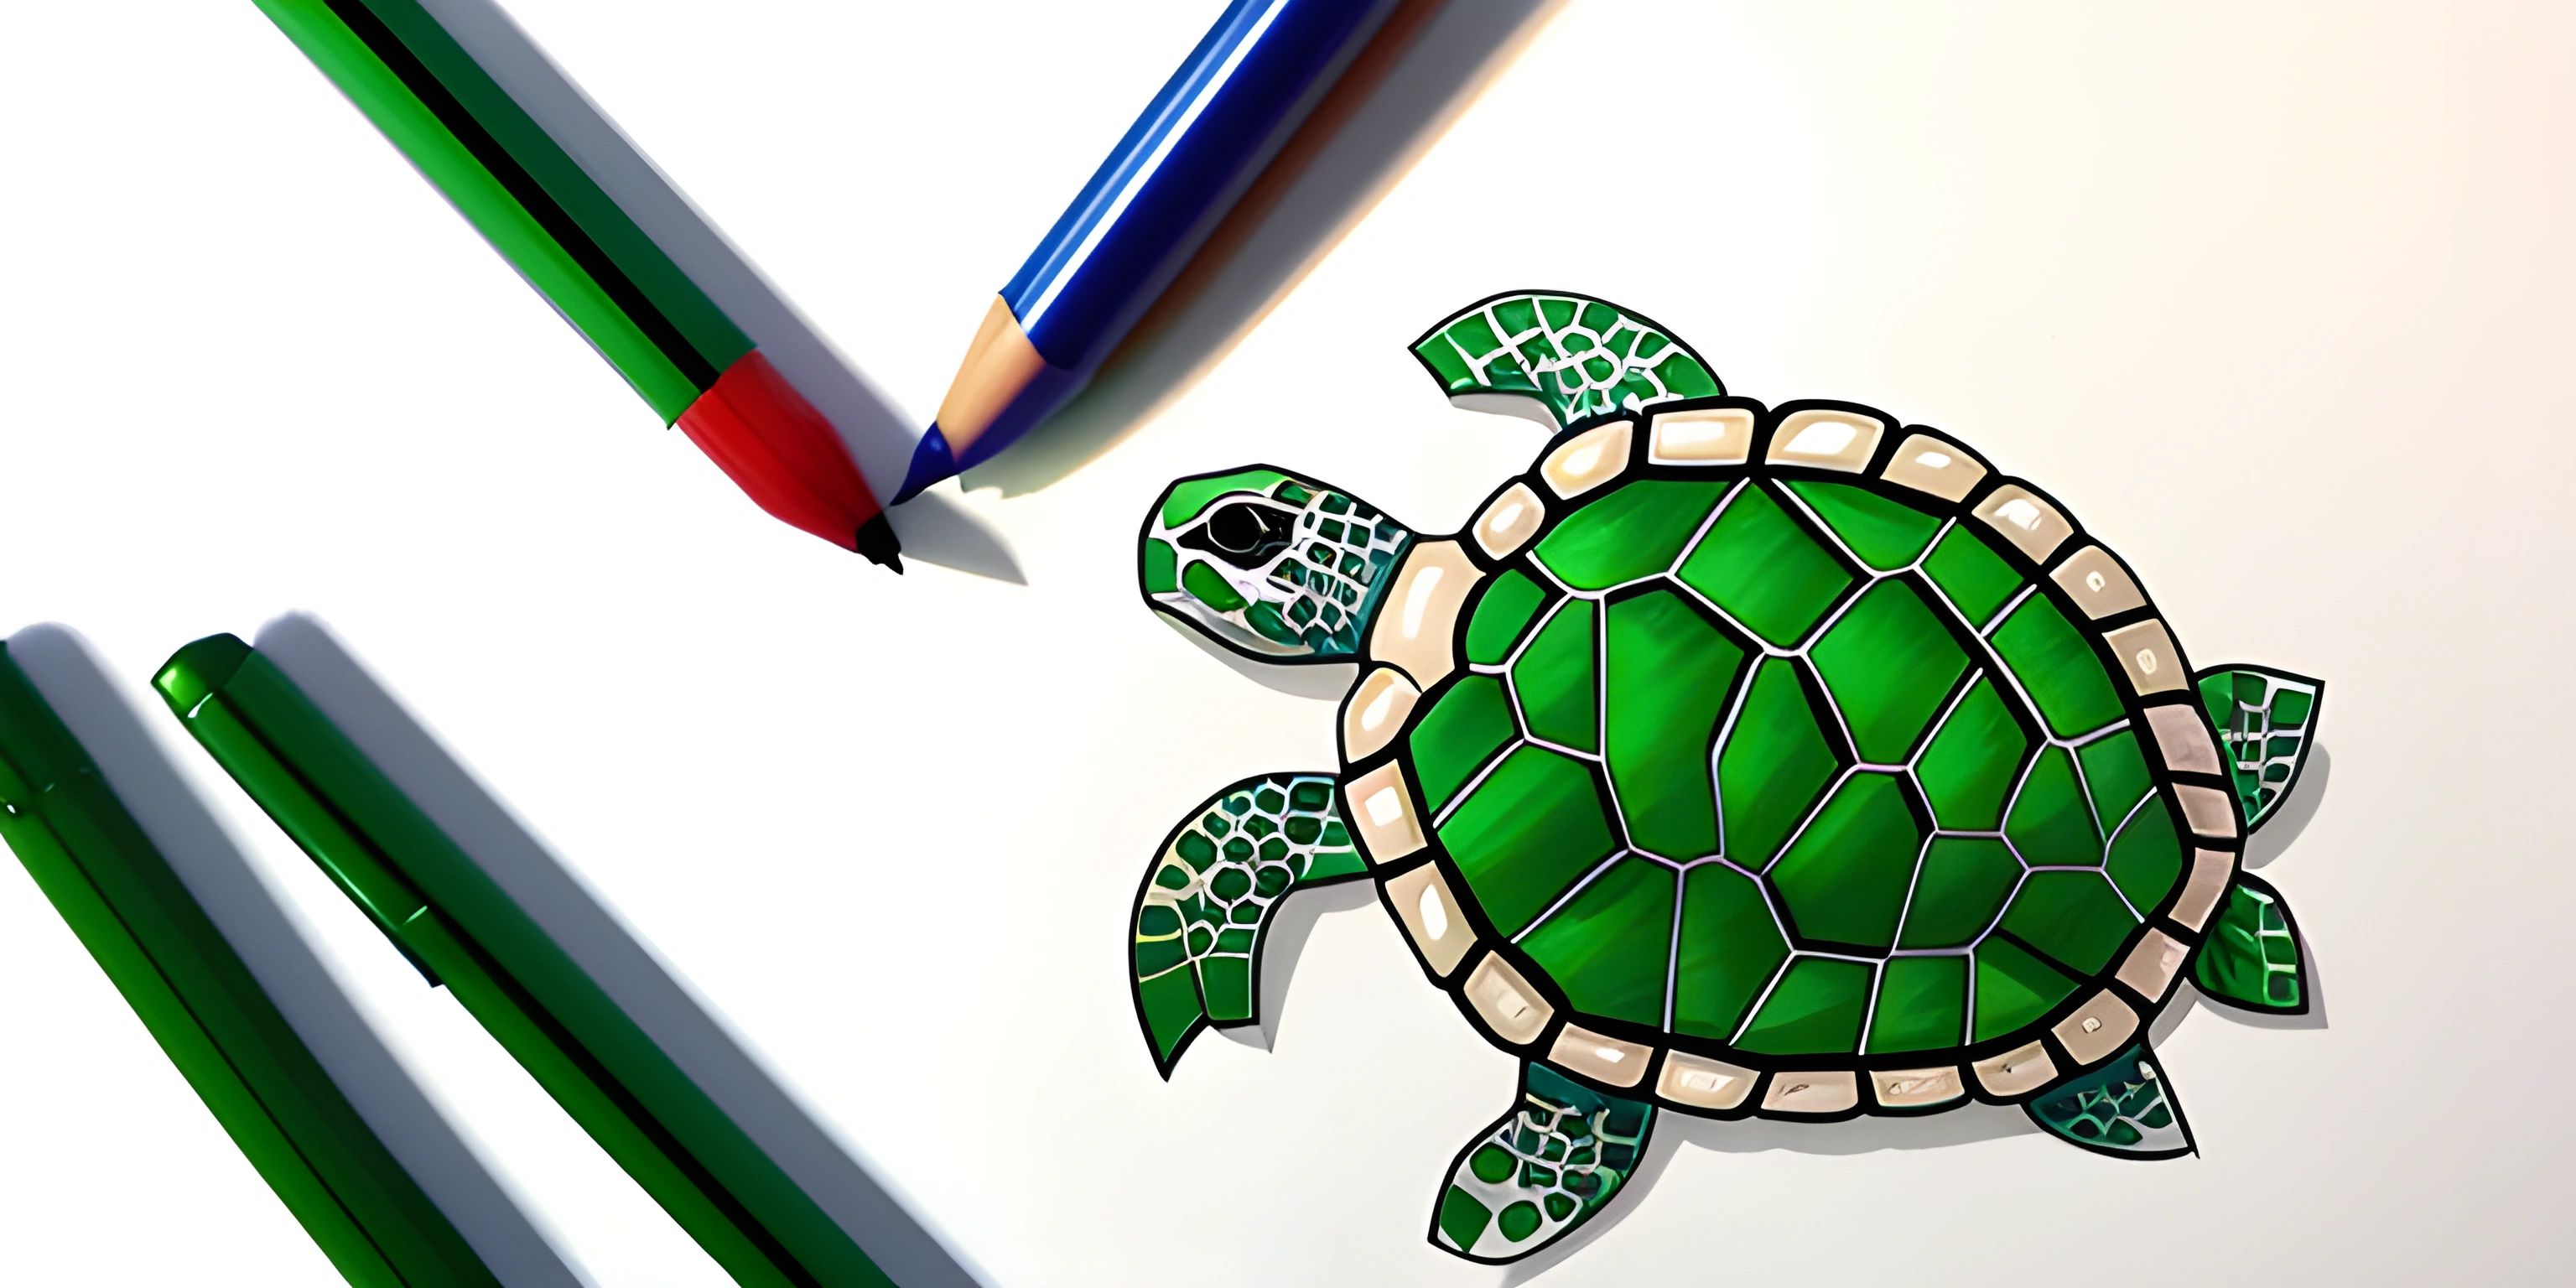 a green turtle drawn on paper next to pencils and markers on the table and wall